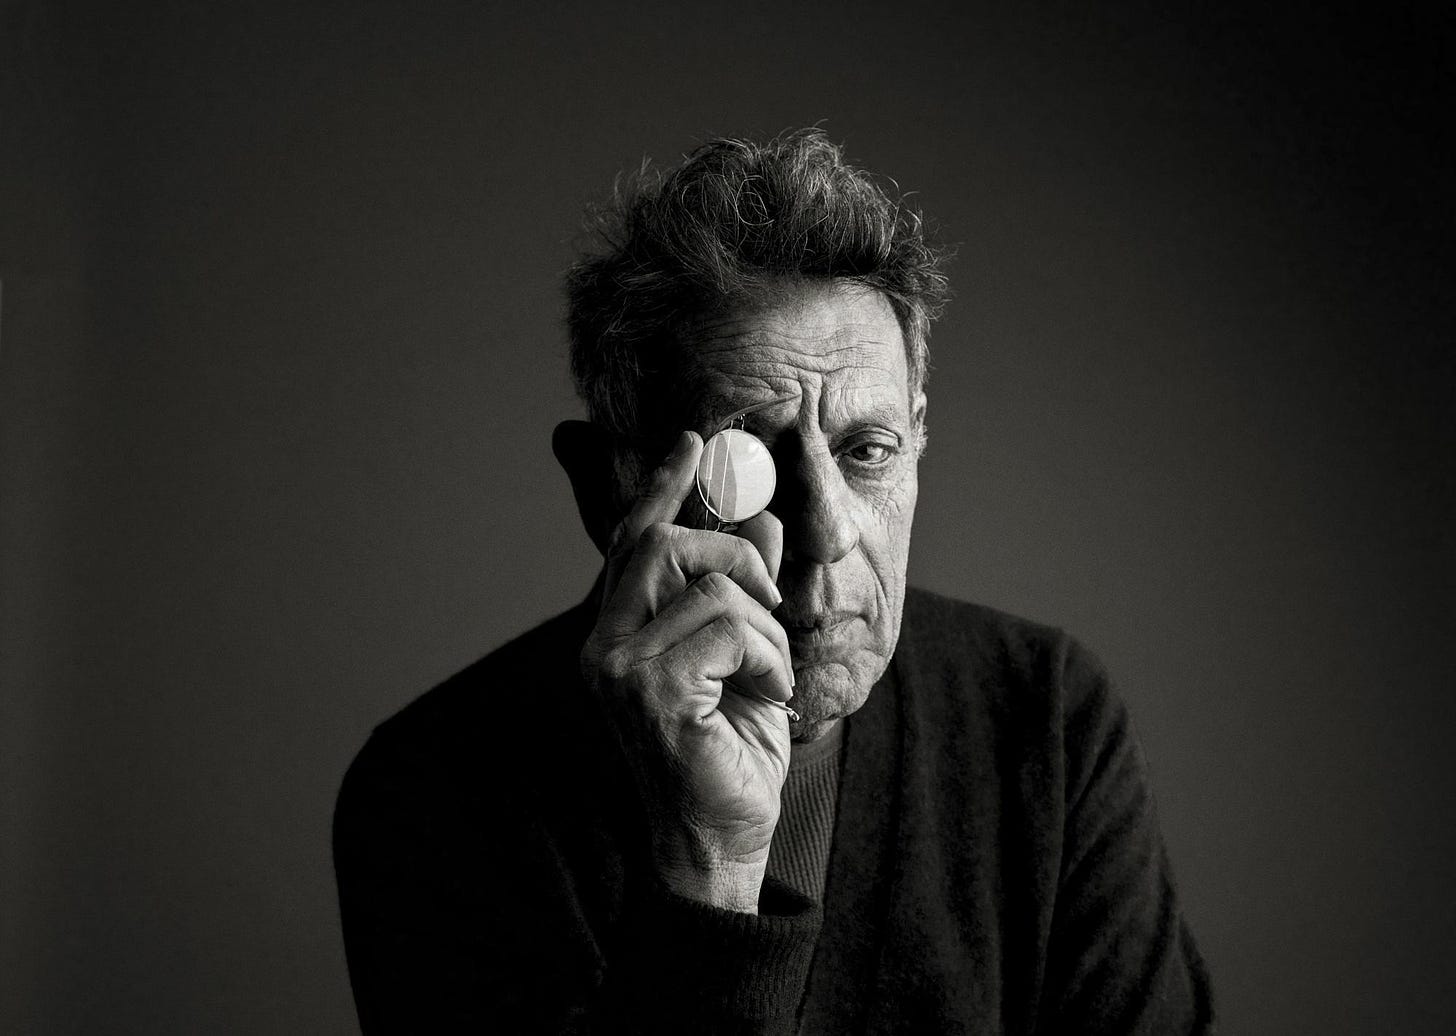 Philip Glass on controlling your output and getting paid for what you make  – The Creative Independent